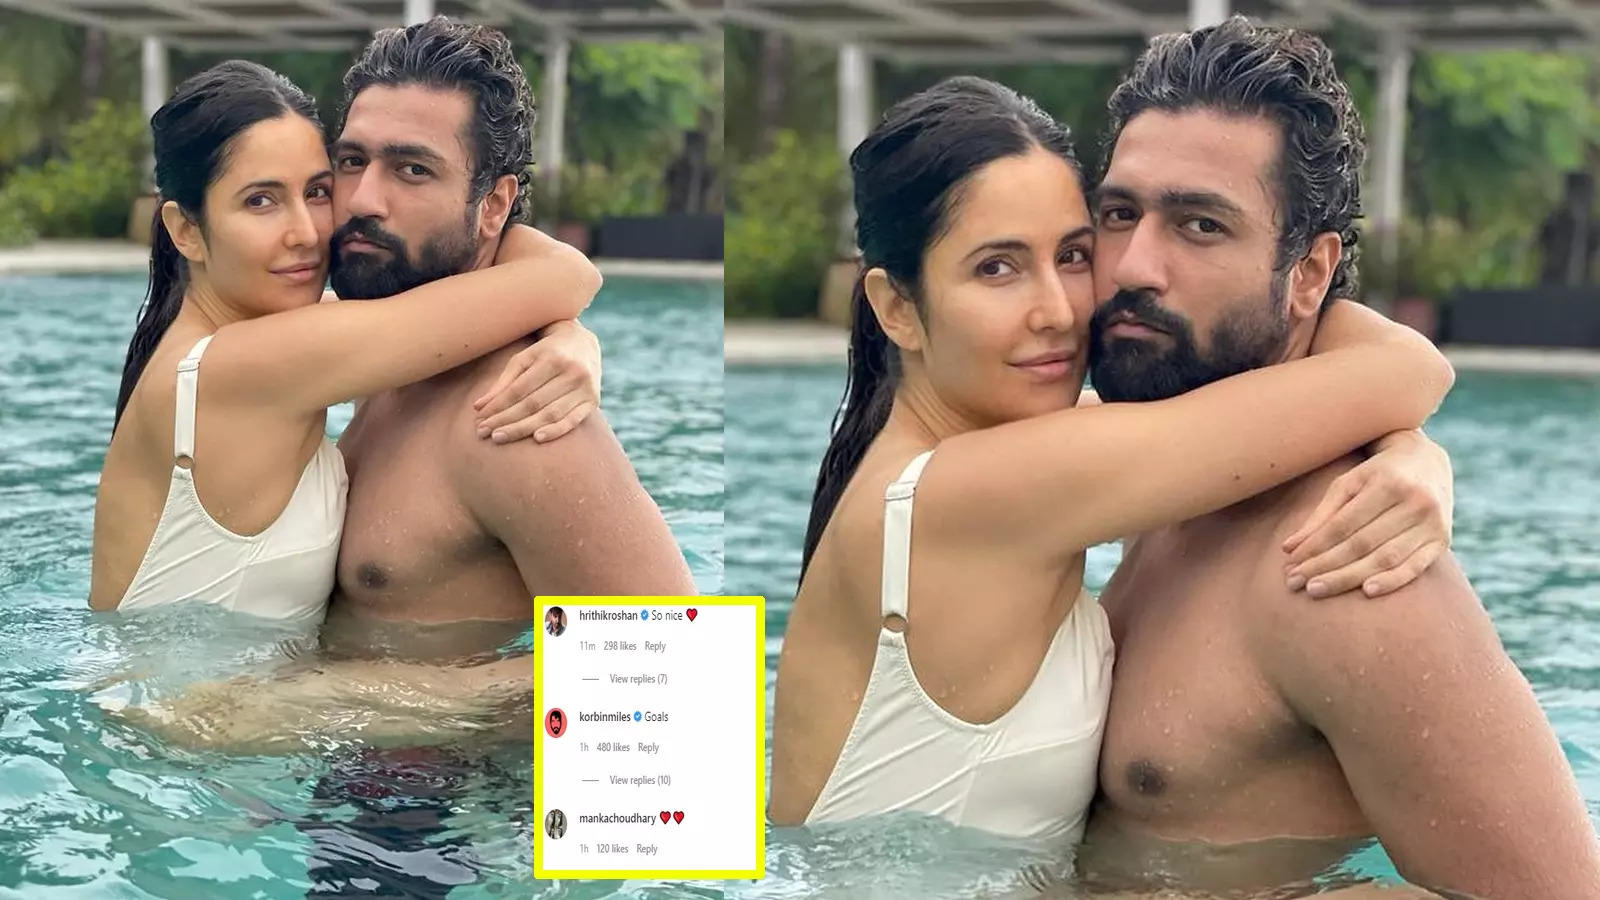 First Time Katrina Kaif Sex Videos - Katrina Kaif plays the possessive wife in steamy new pool pic with Vicky  Kaushal | Hindi Movie News - Times of India